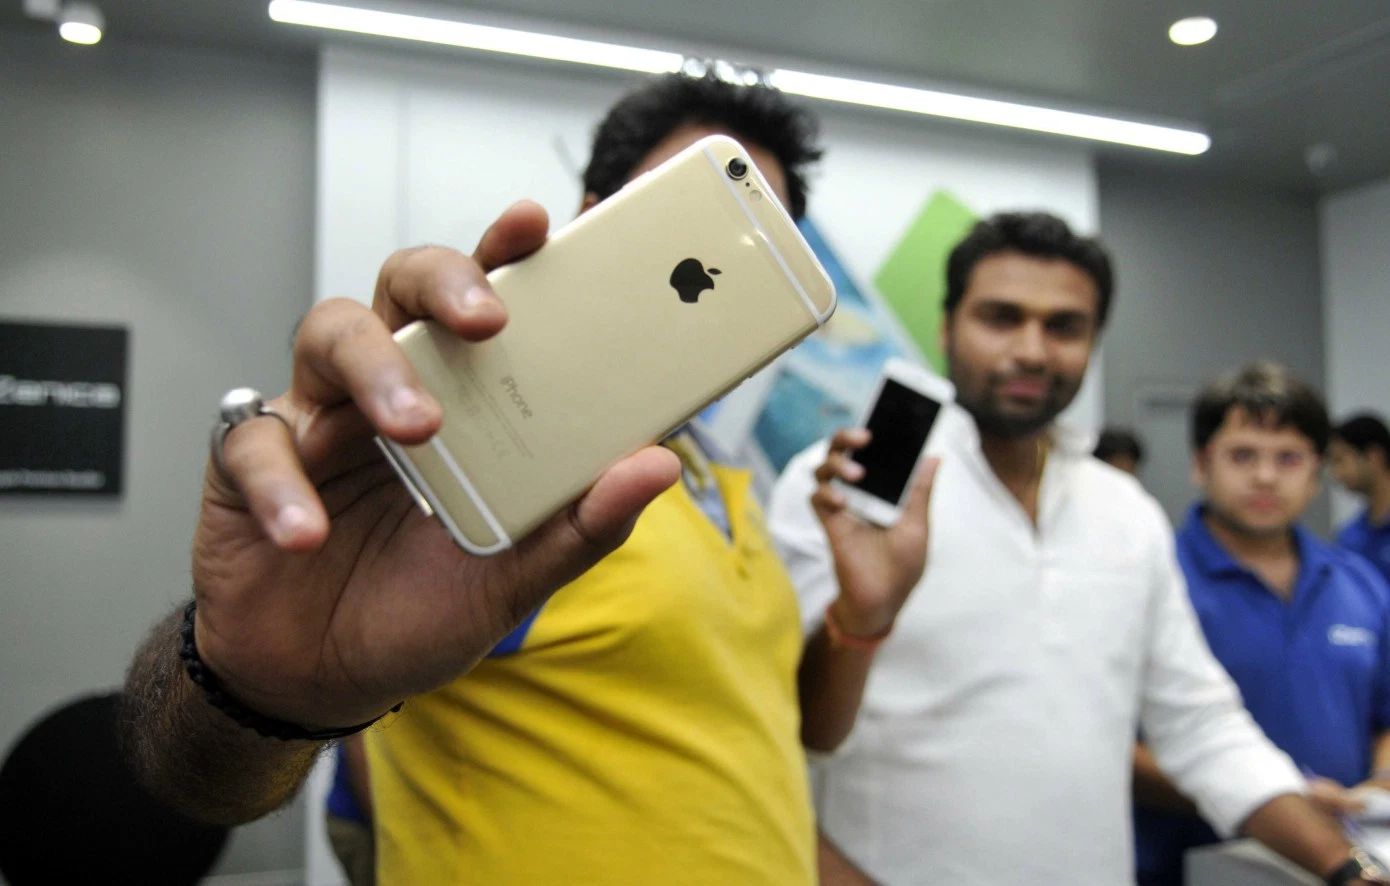 India liberalizes Foreign Investment Rules in a win for Apple